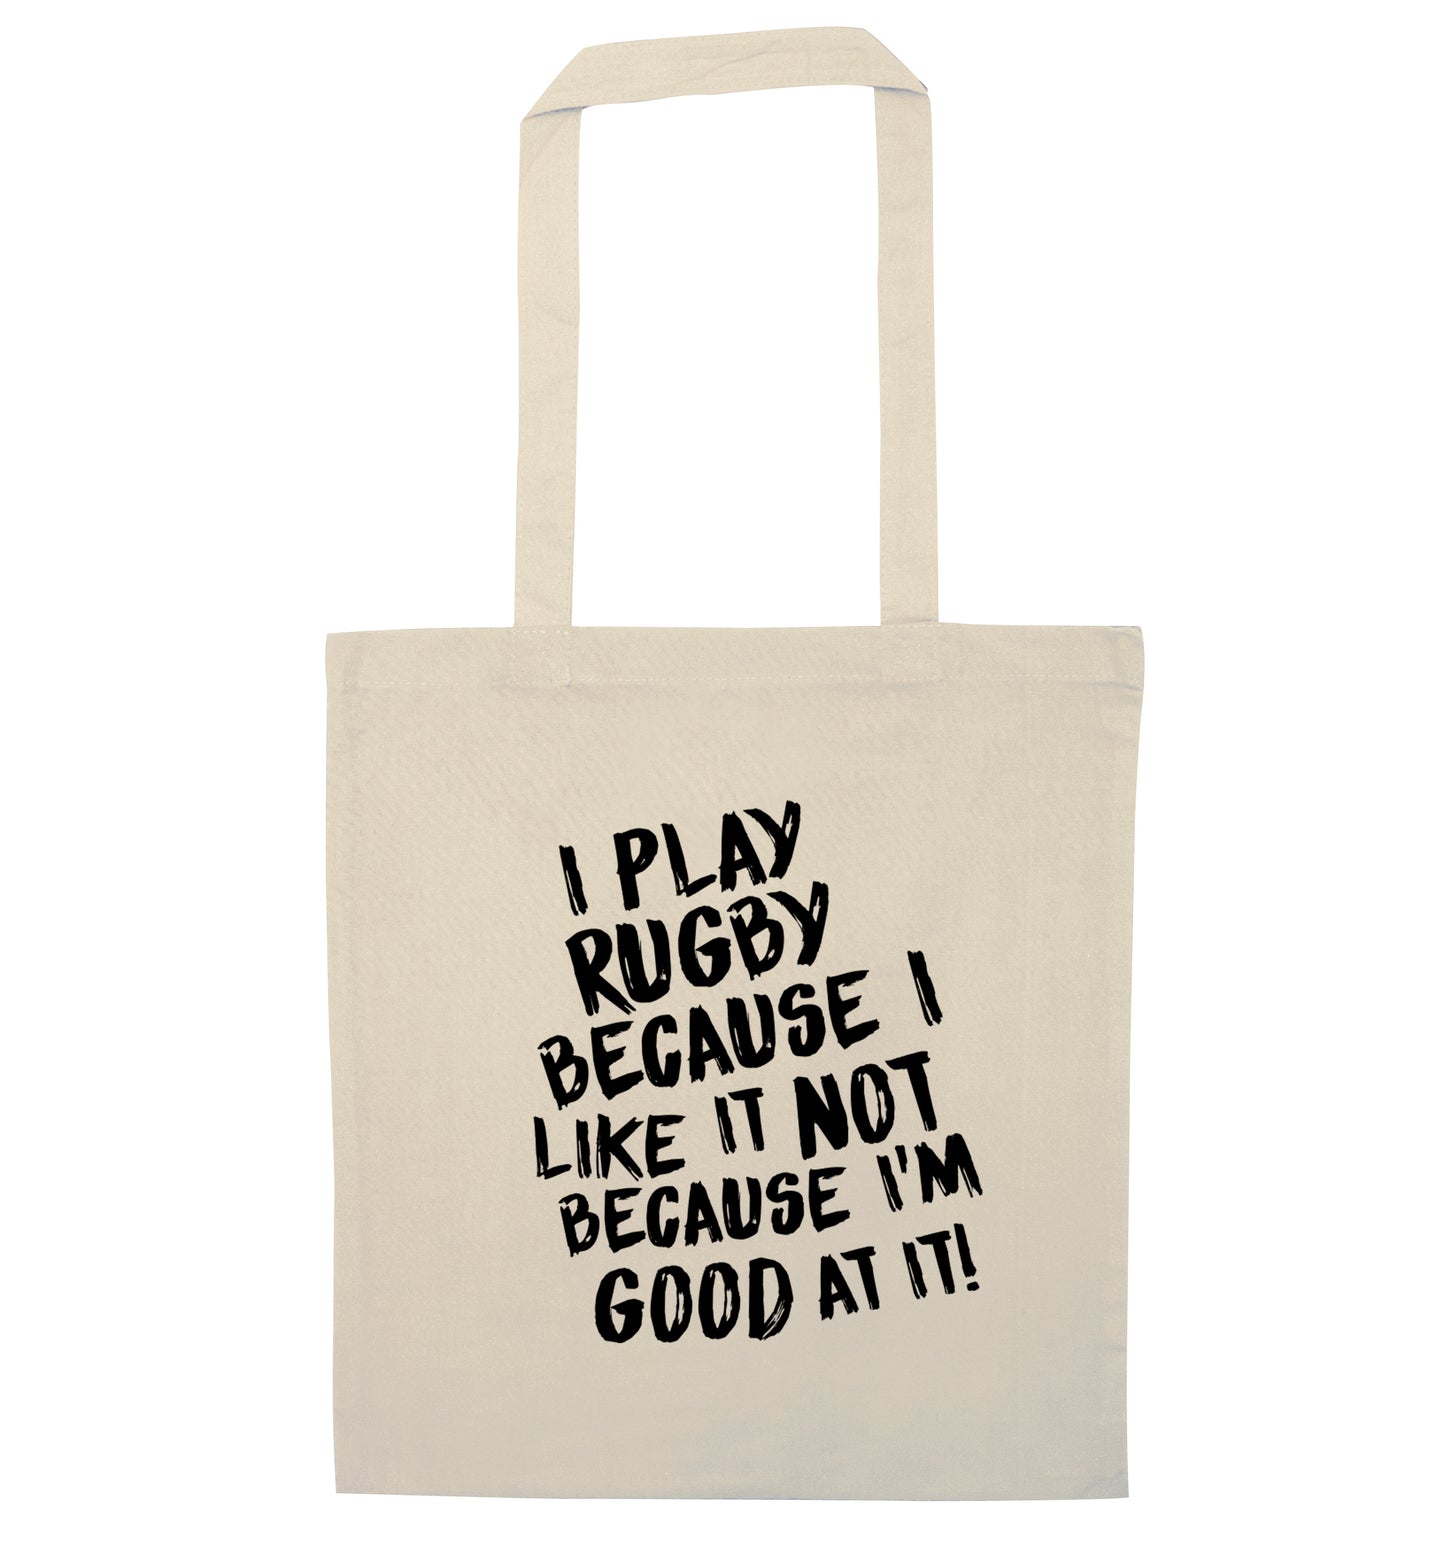 I play rugby because I like it not because I'm good at it natural tote bag